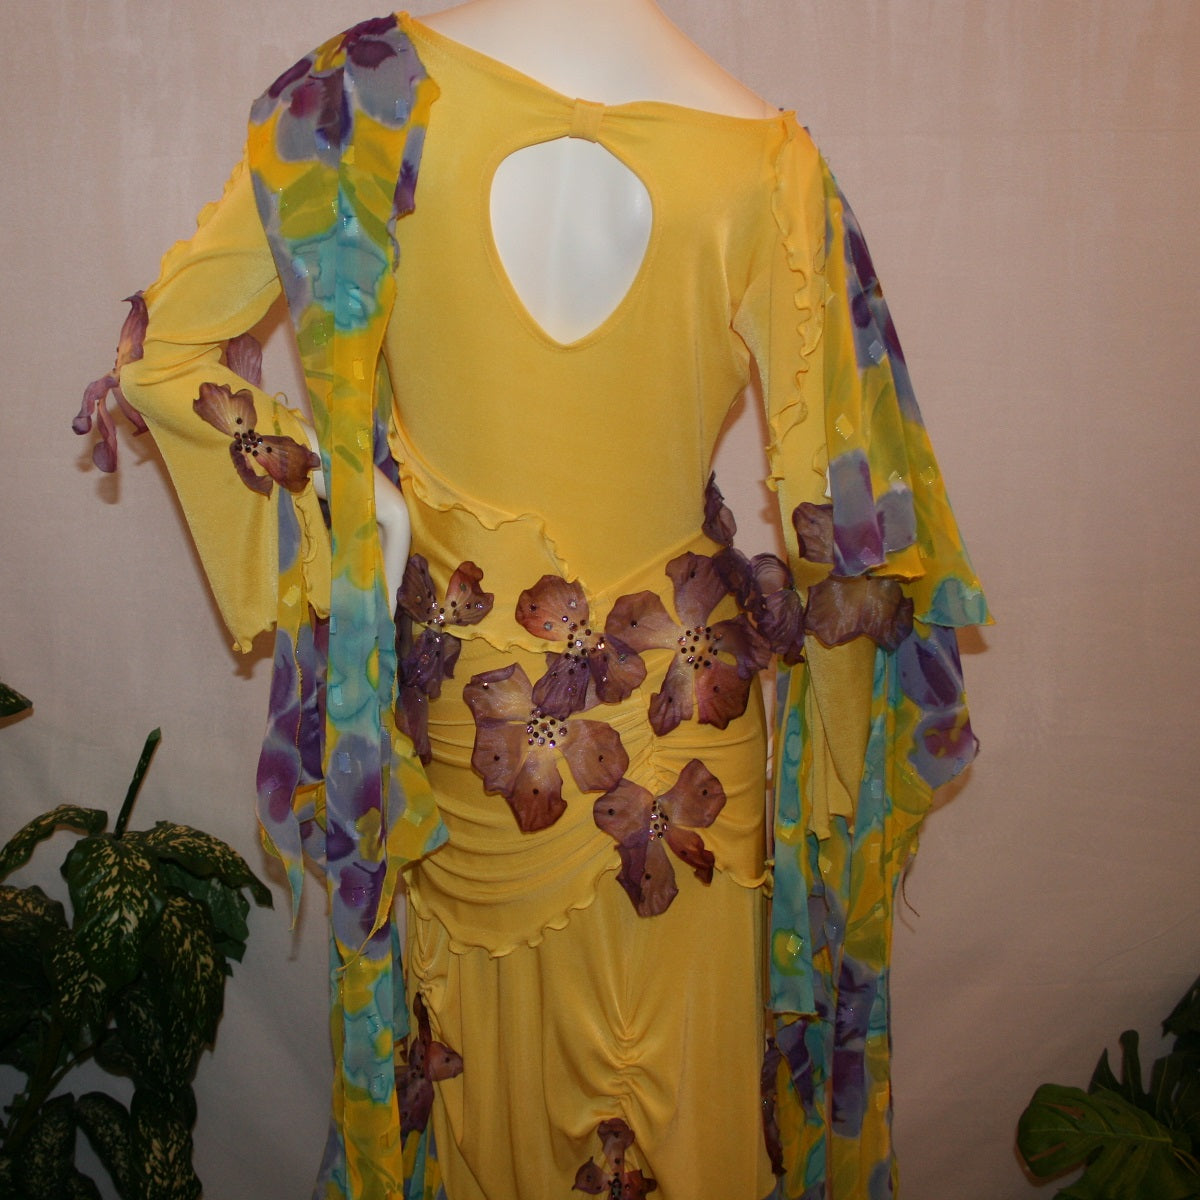 Crystal's Creations upper back view of Yellow ballroom dress created of luxurious yellow slinky with yards of flower printed textured chiffon of yellow, orchids & blues is embellished with deep orchid silk flowers that have rhinestone work in shades of orchid.